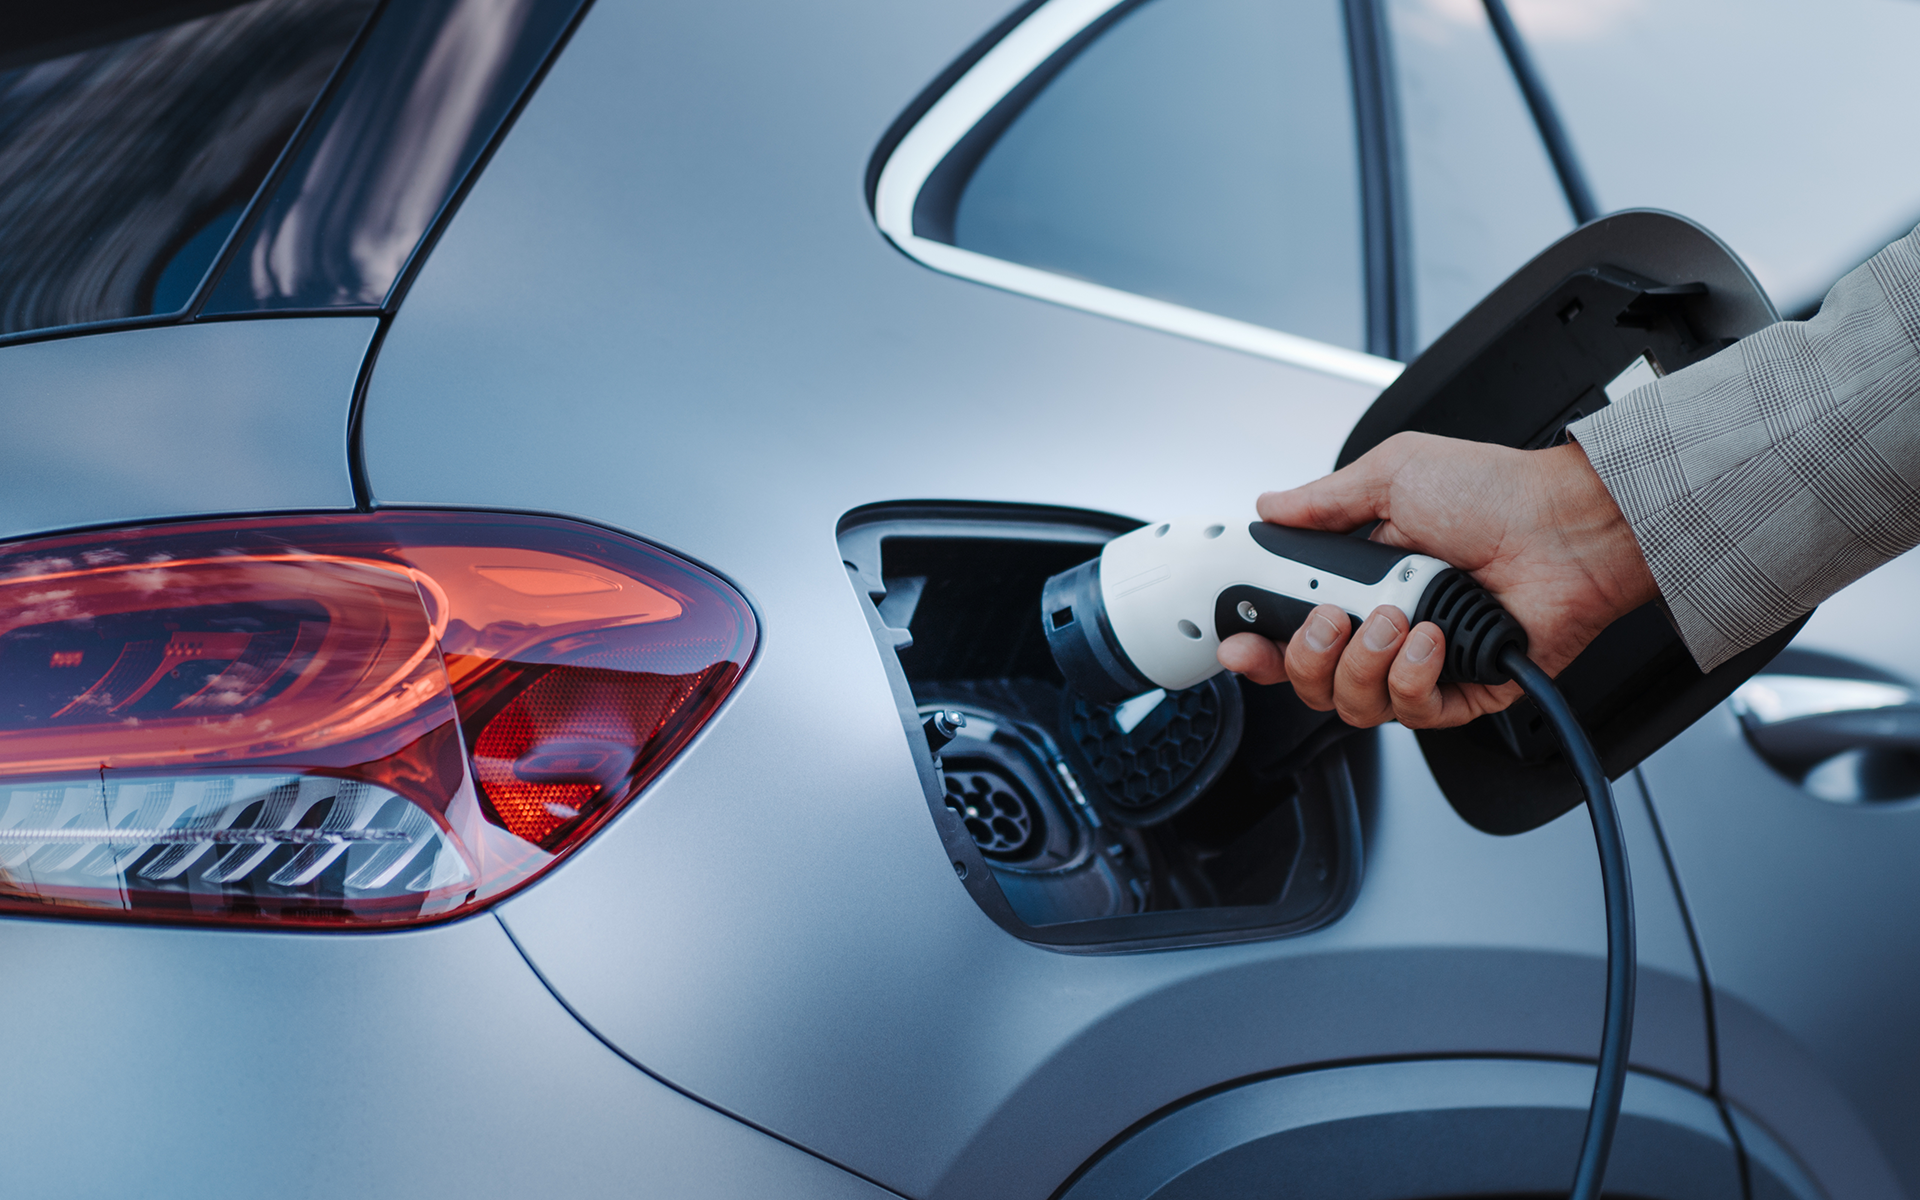 Electric vehicle charging stations required for large non-residential buildings by 2025